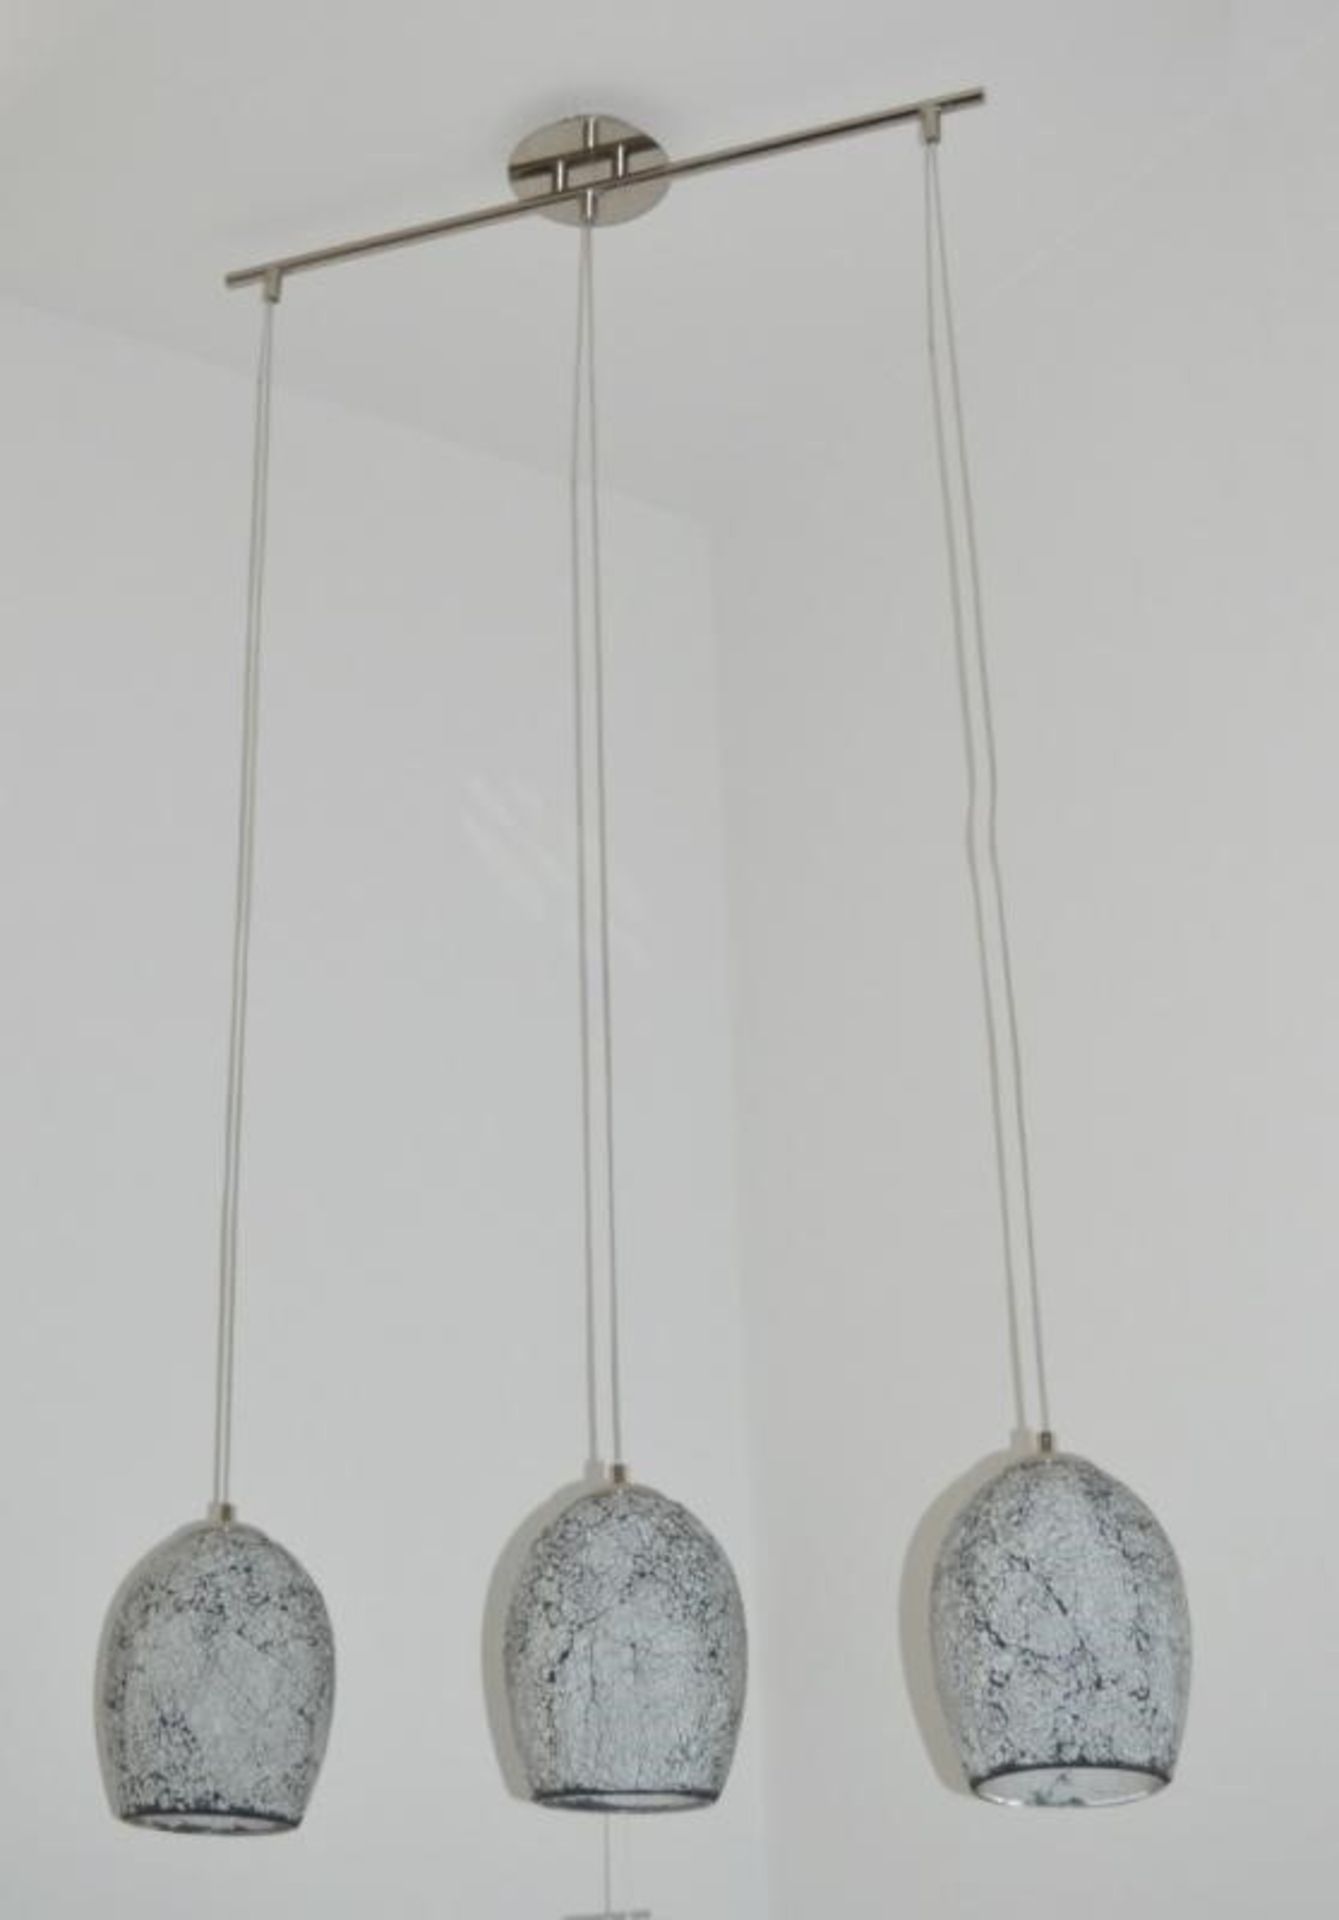 1 x Crackle White Mosaic Glass 3 Light Fitting With Dome Shades and Satin Silver Trim - Ex Display S - Image 5 of 5